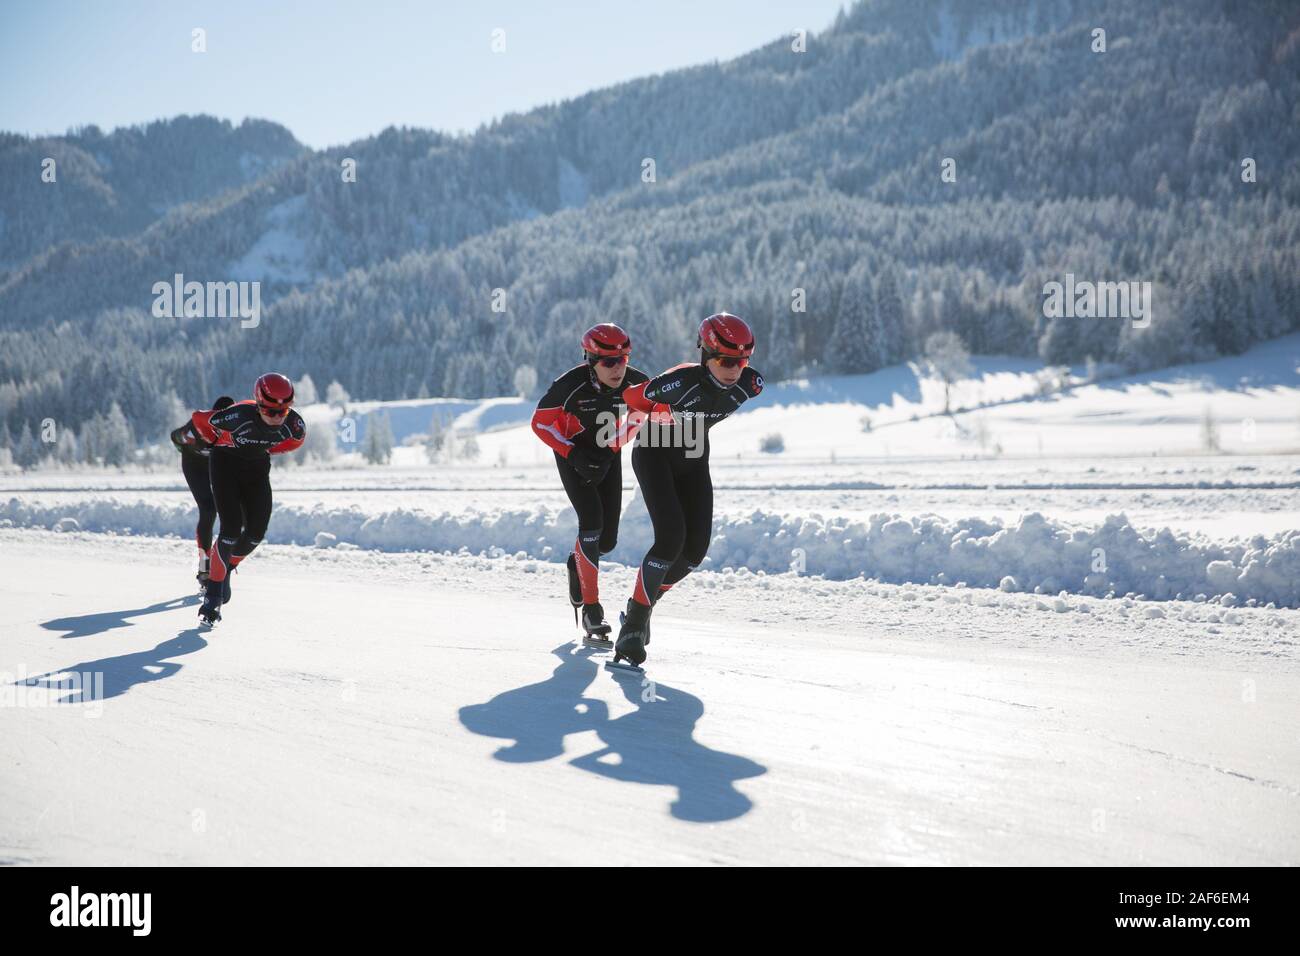 Ice skating on the lake in a beautiful winter landscape.Group of men  Championship marathon ice speed -skating on natural ice, Lake Weissensee,  Austria Stock Photo - Alamy